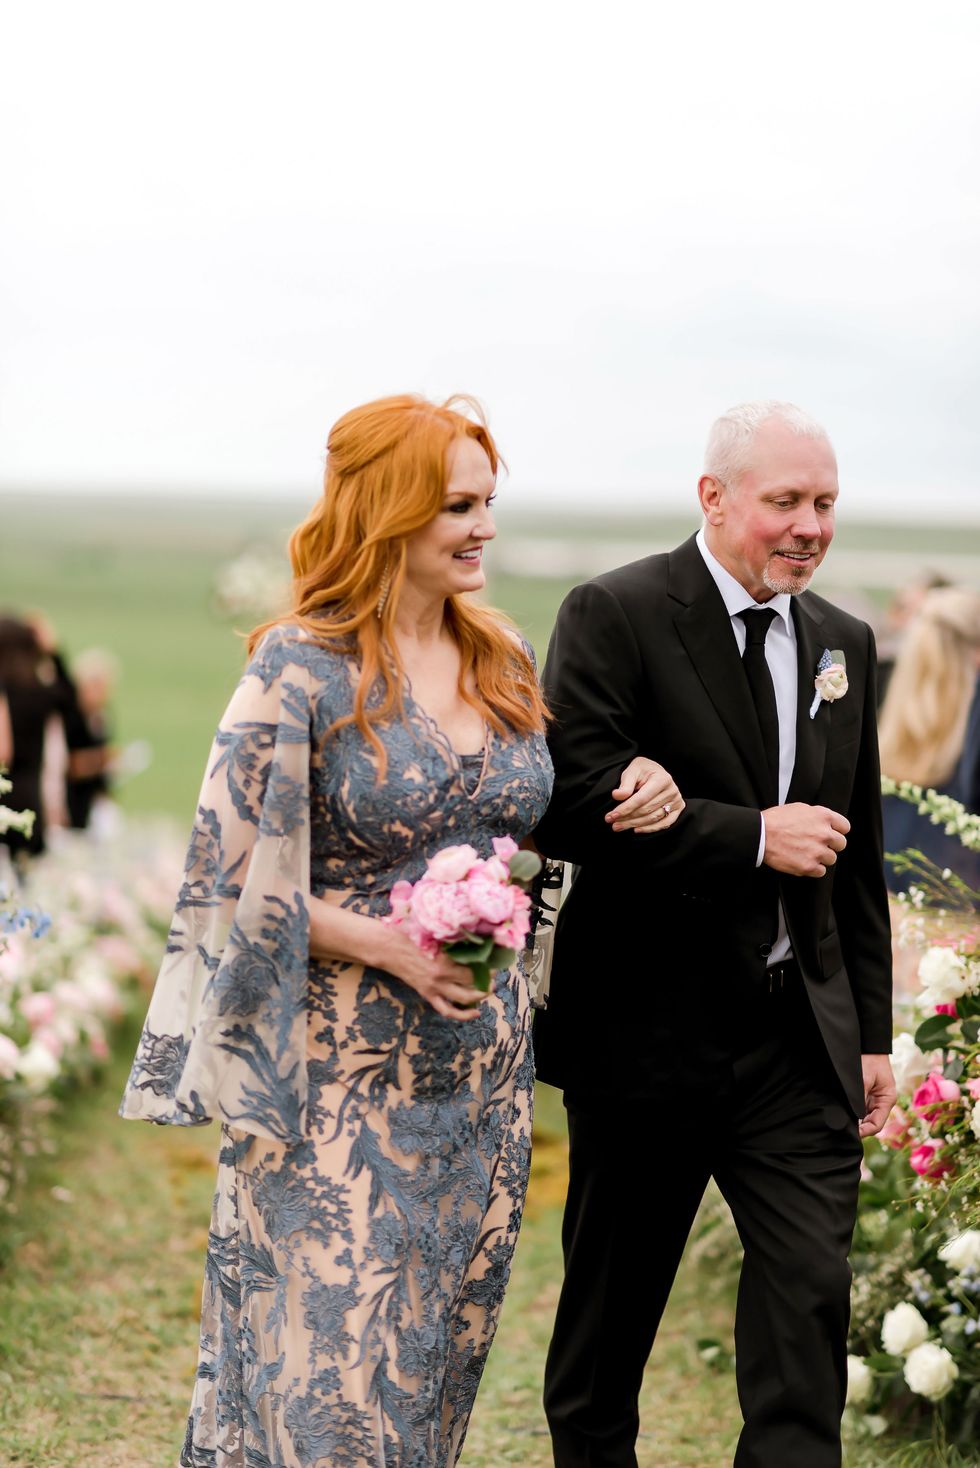 ree drummond and ladd drummond at the wedding of their daughter, alex